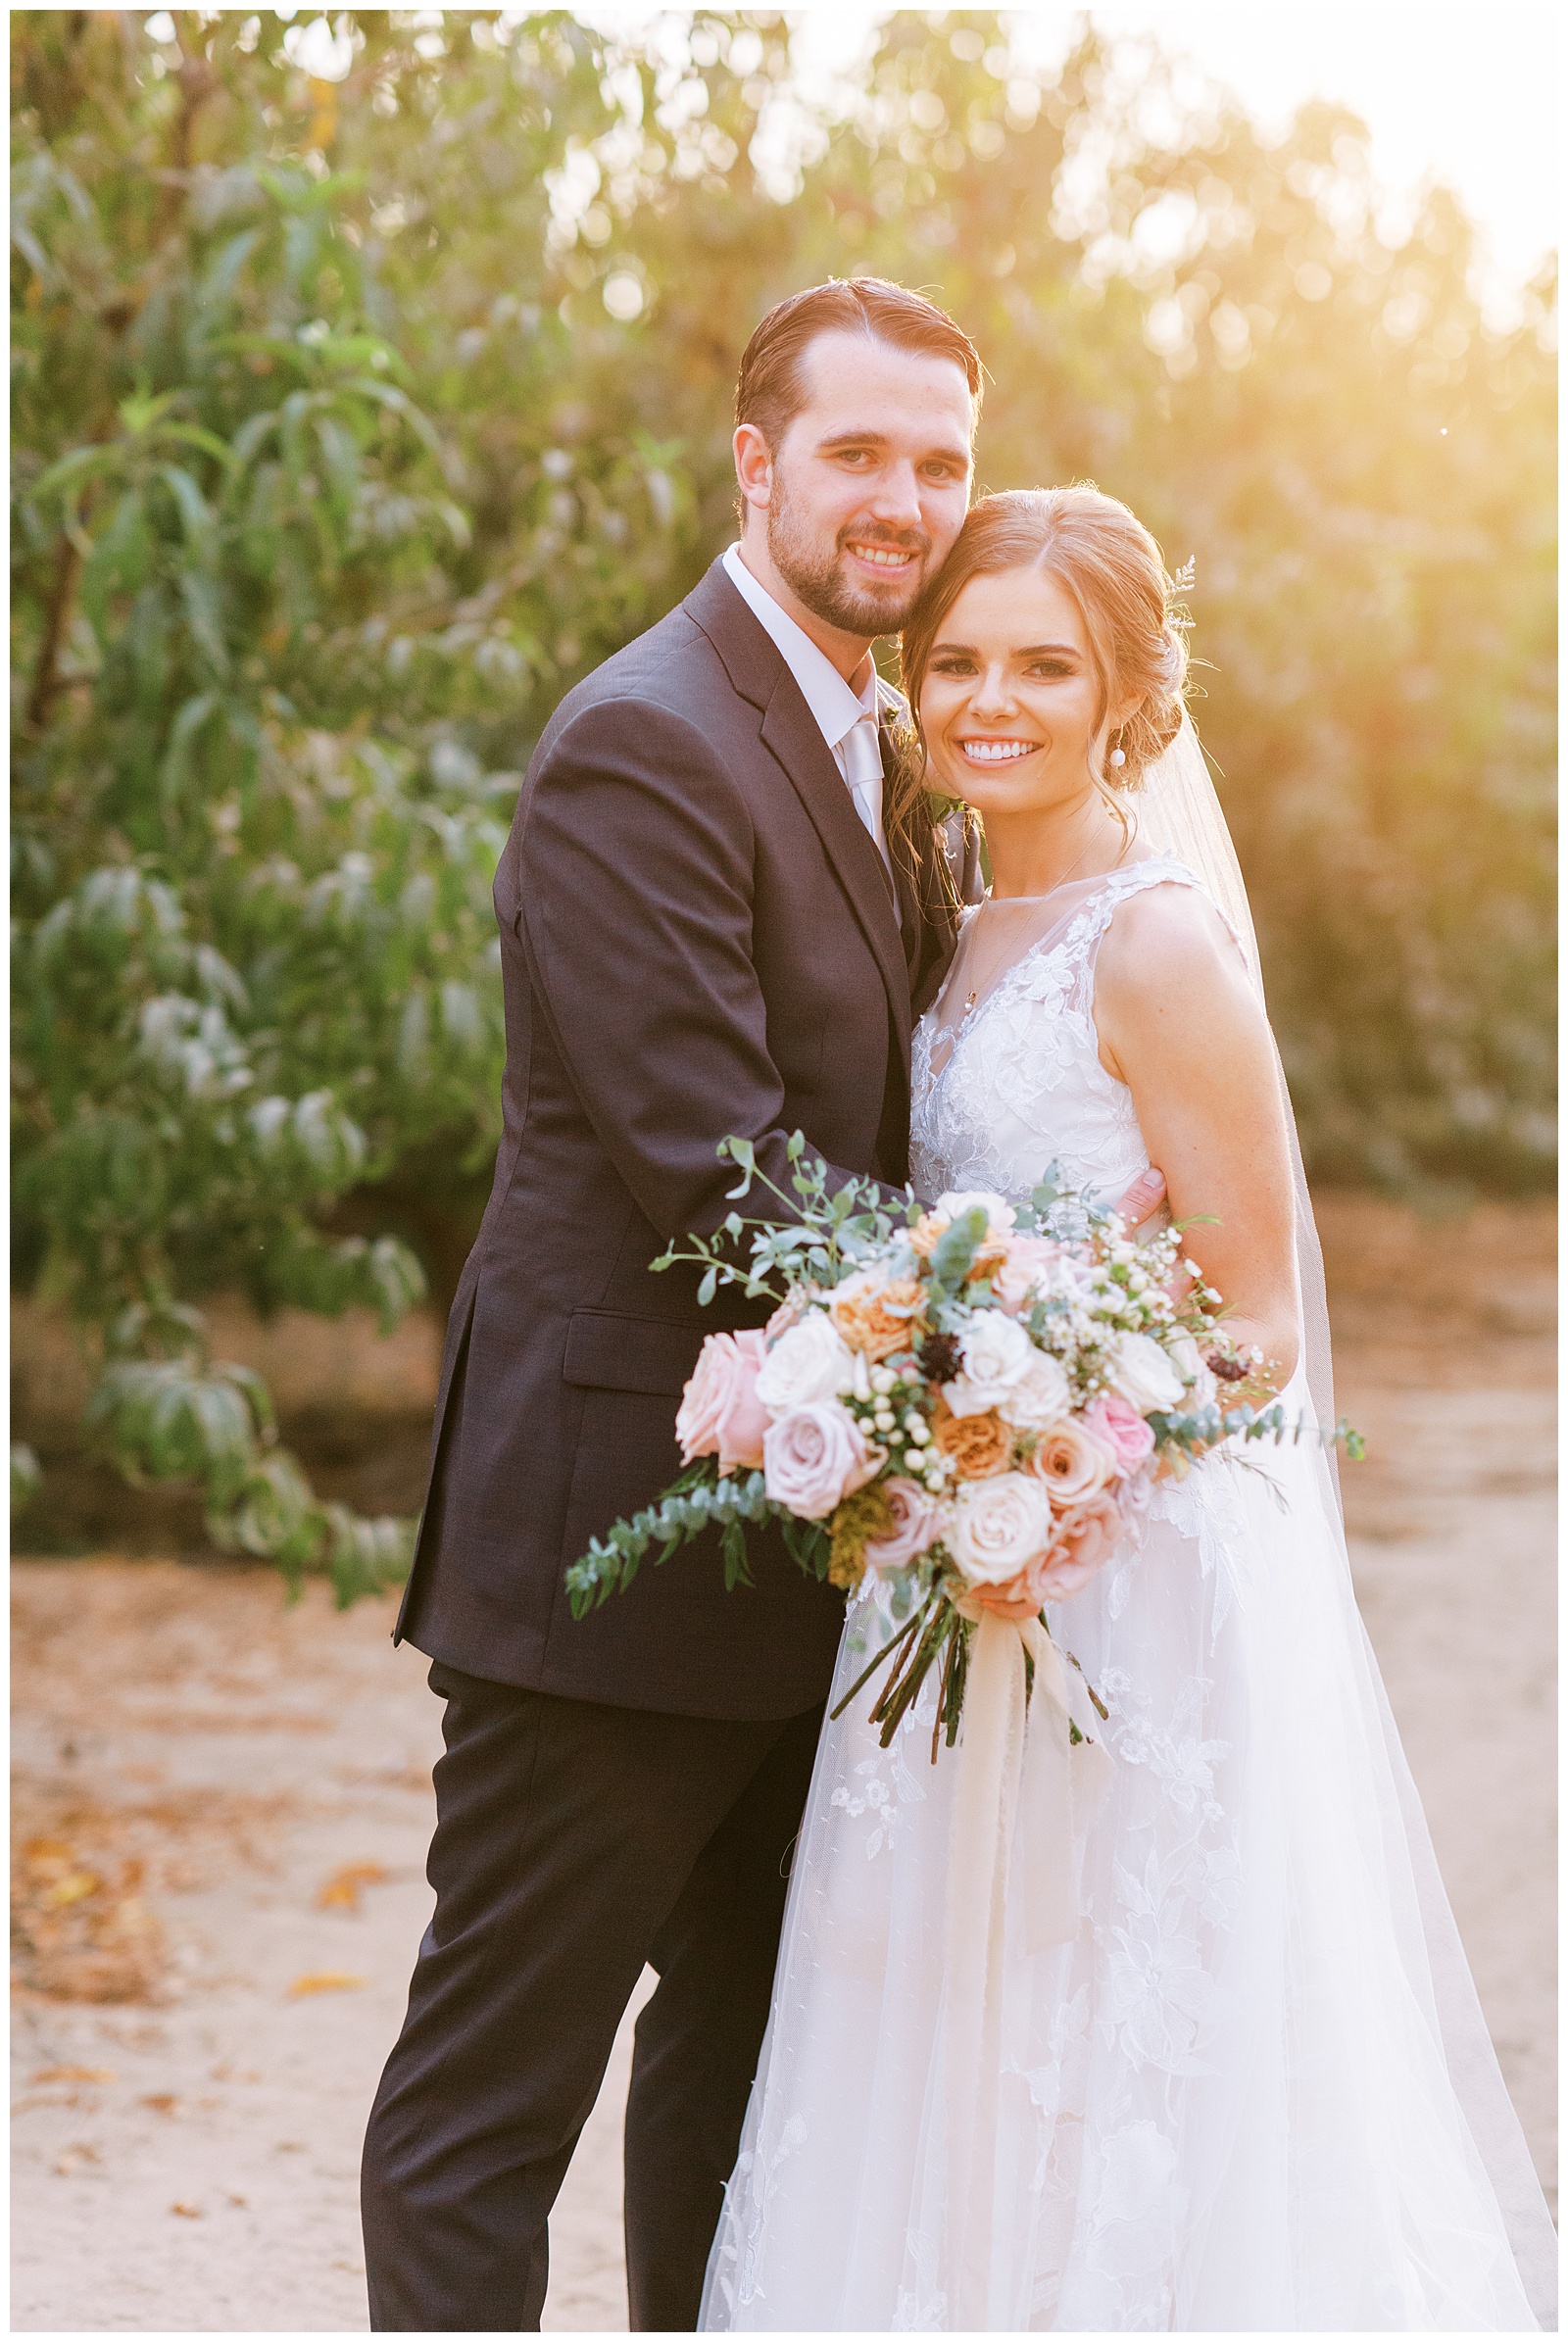 bride and groom embracing smiling at camera with golden sunlight 